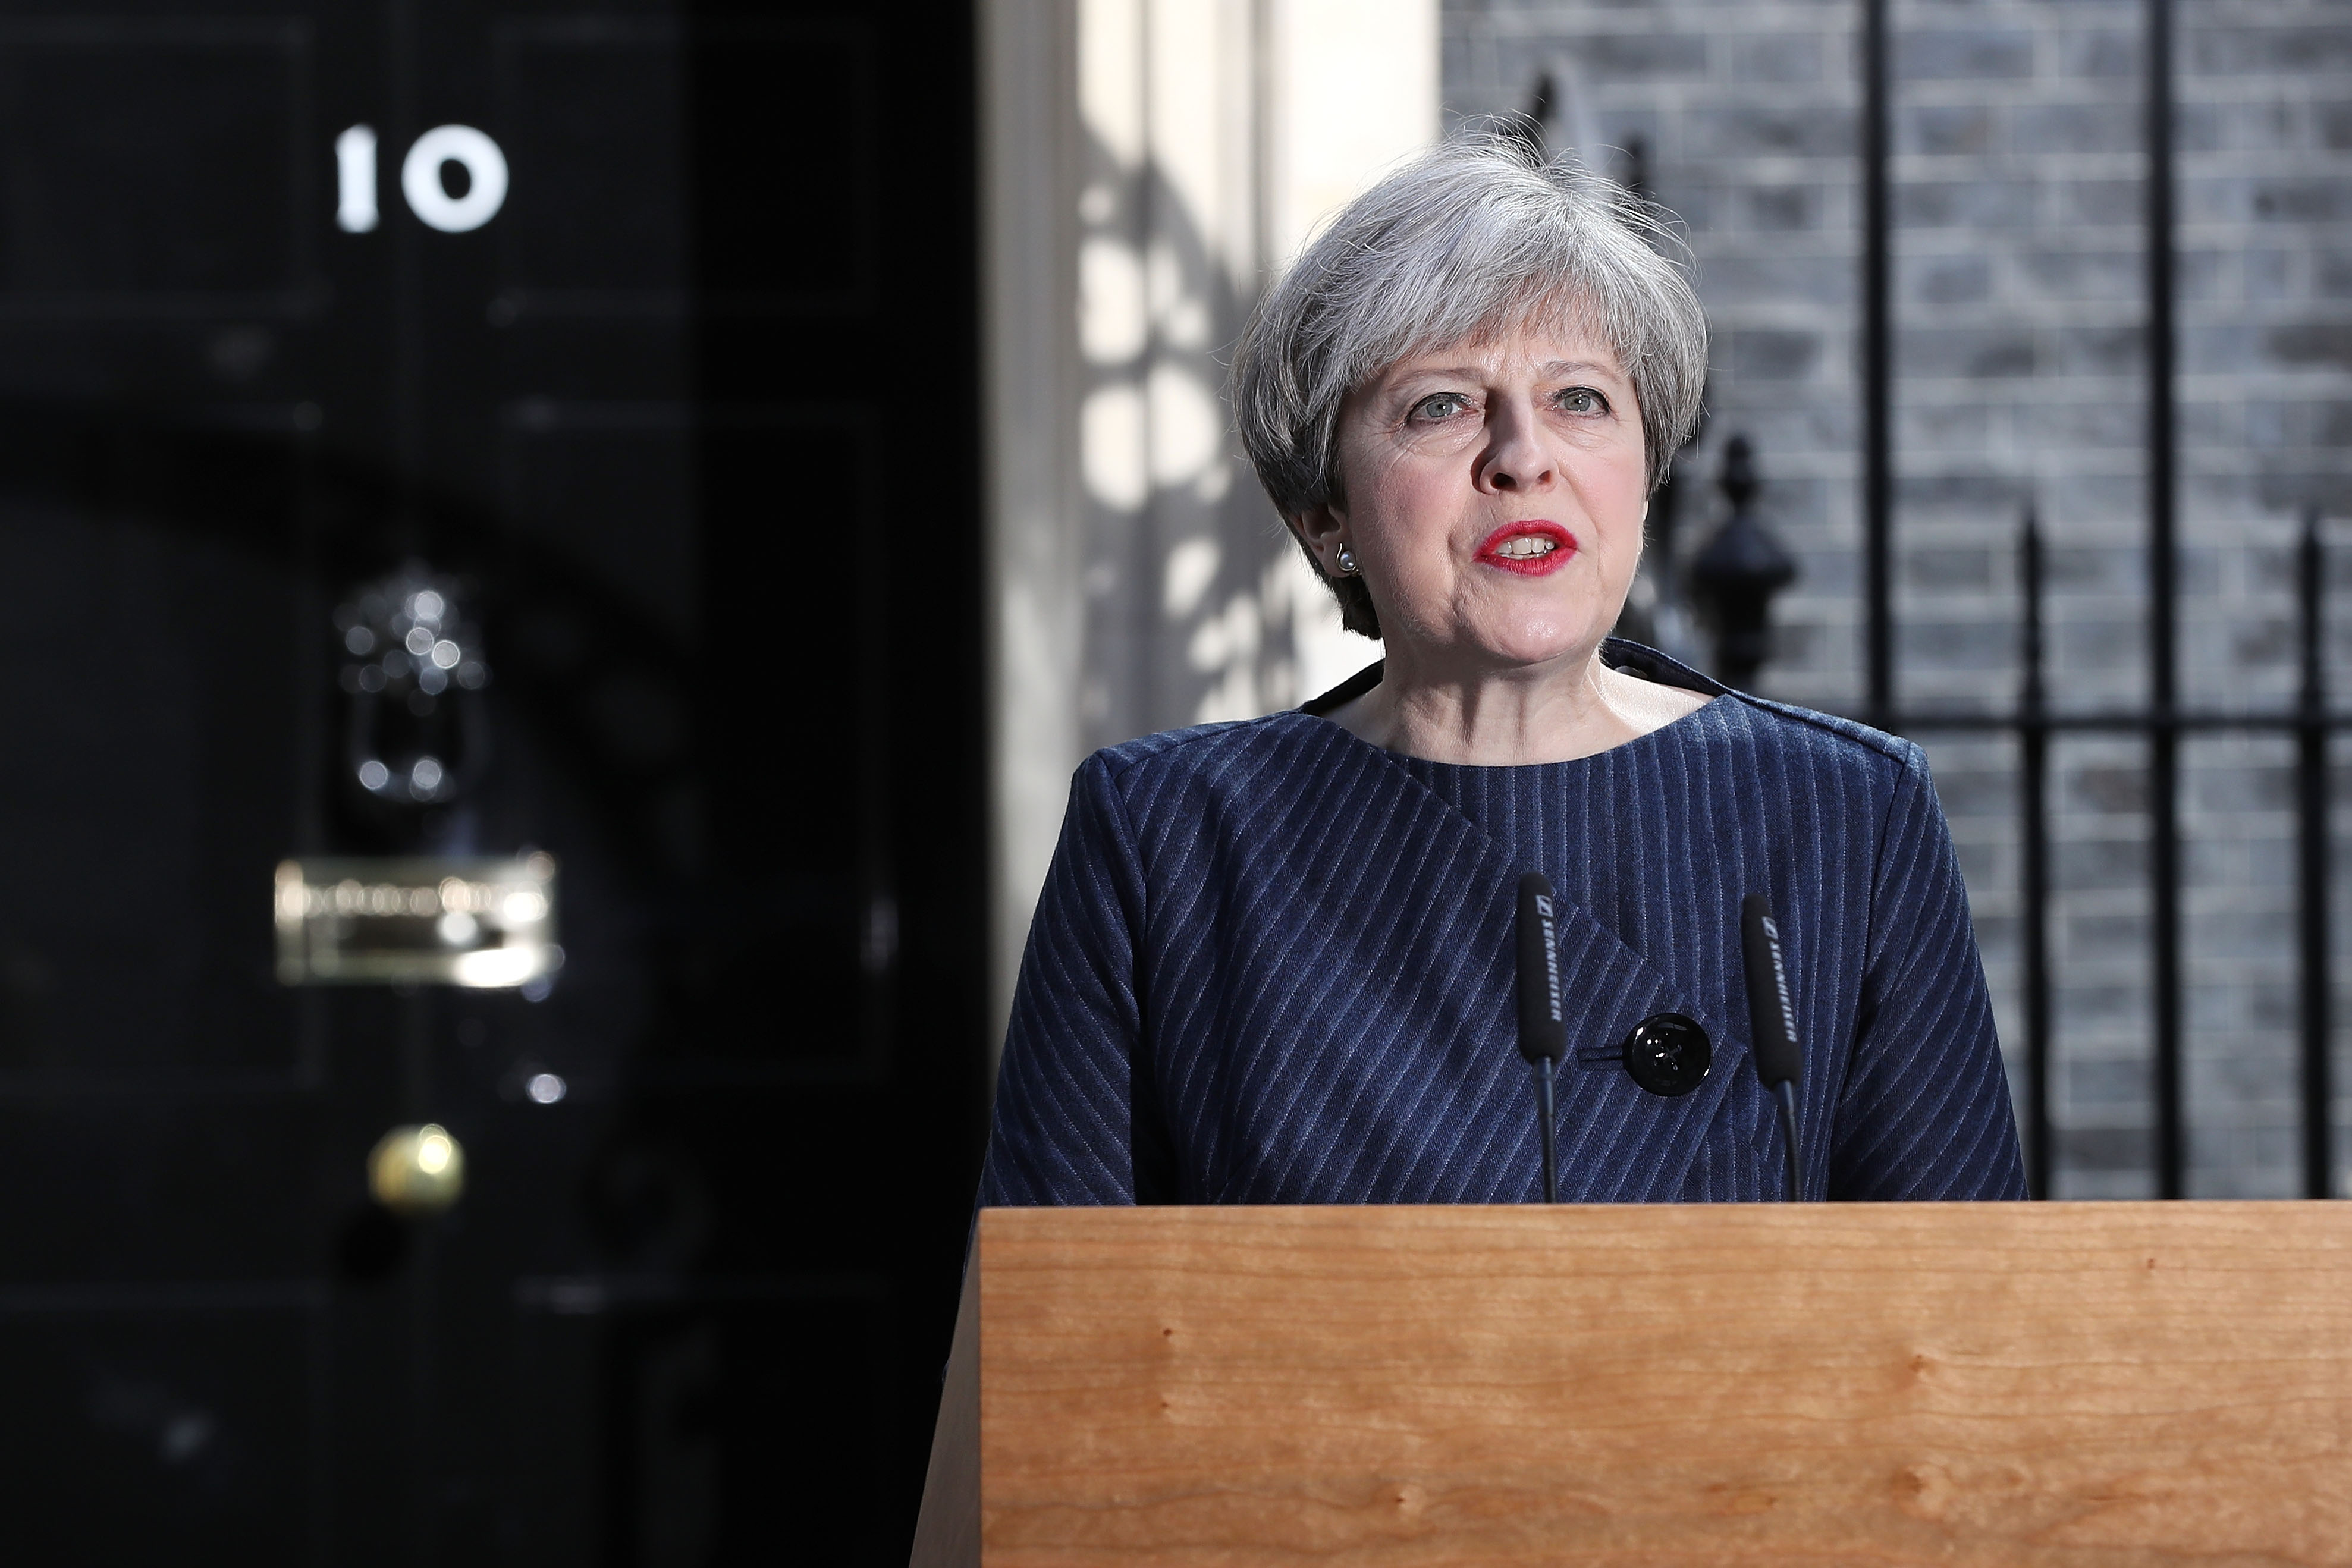 Prime Minister Theresa May makes a statement to the nation in Downing Street on April 18, 2017 in London, United Kingdom. (Dan Kitwood—Getty Images)